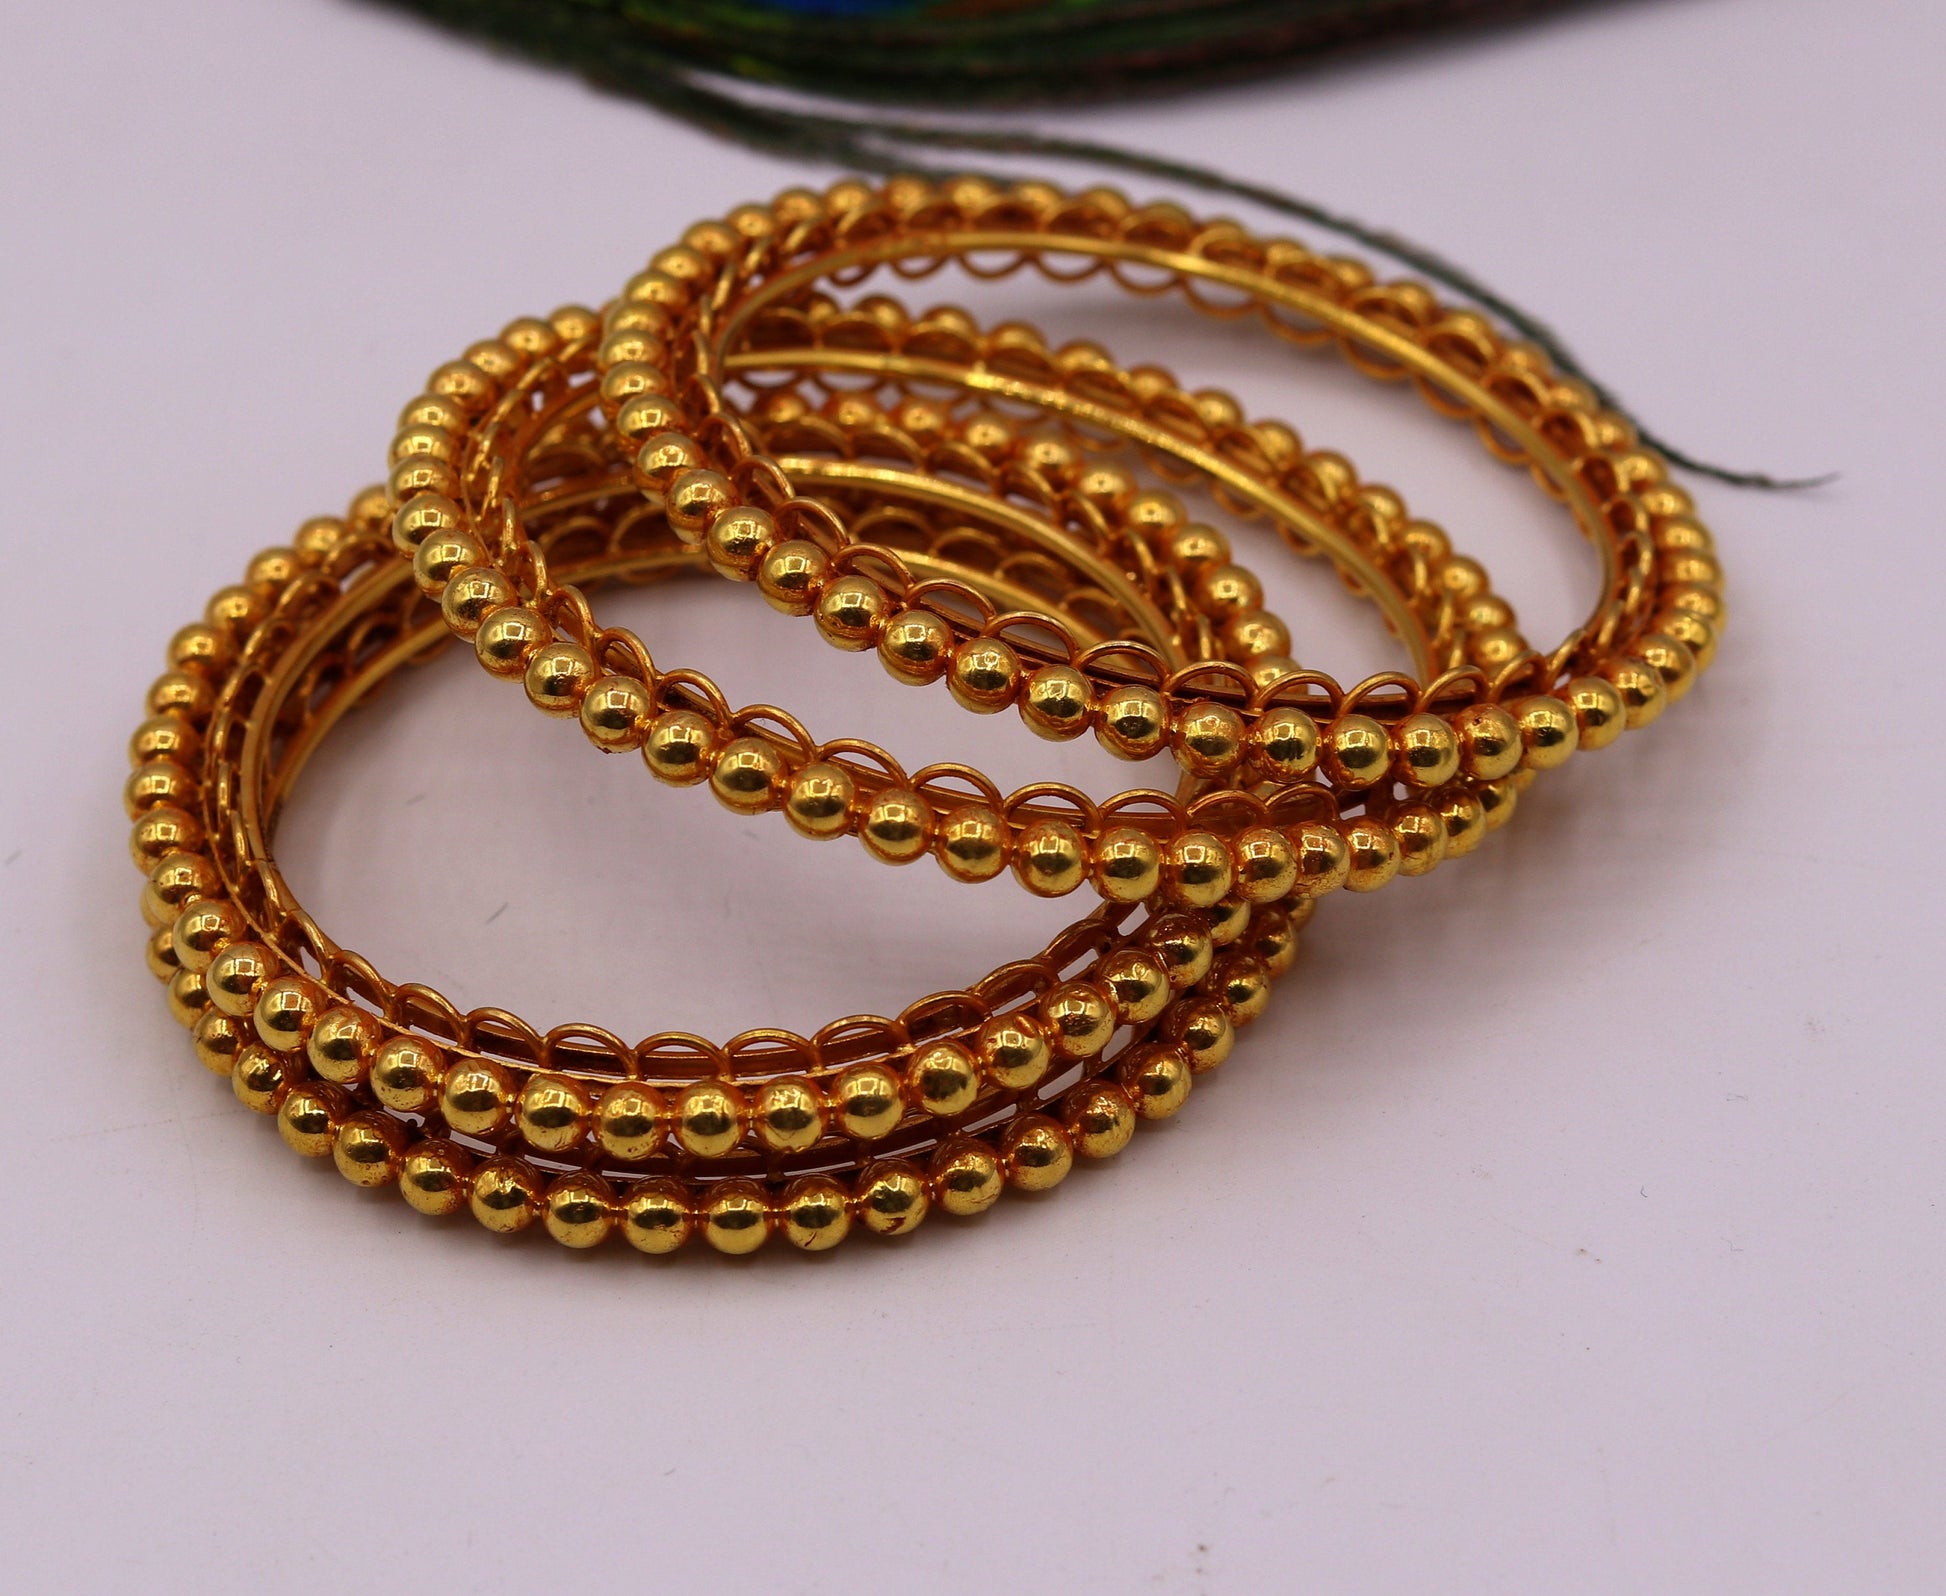 Handmade indian Designer antique style solid gold bangle bracelet fabulous women's traditional tribal jewelry from india ba43 - TRIBAL ORNAMENTS